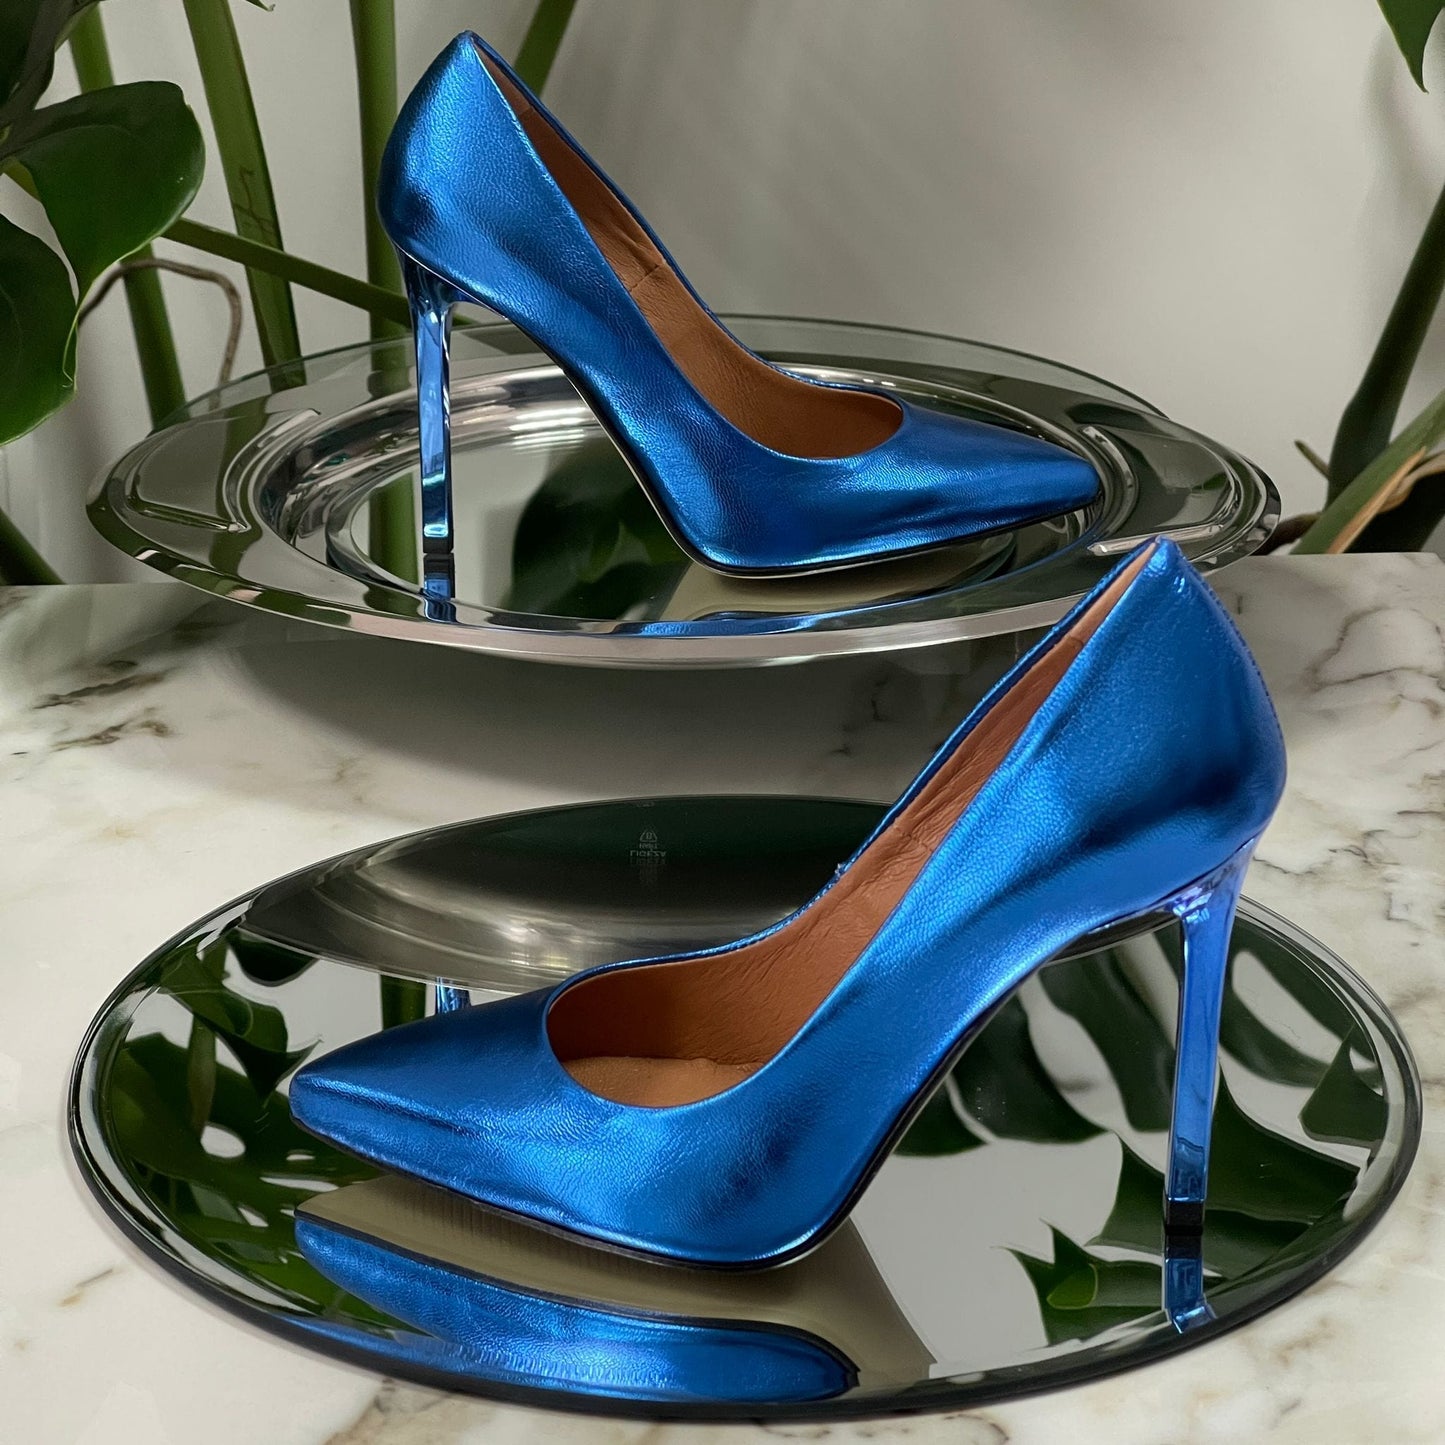 Blue leather court heels in petite size